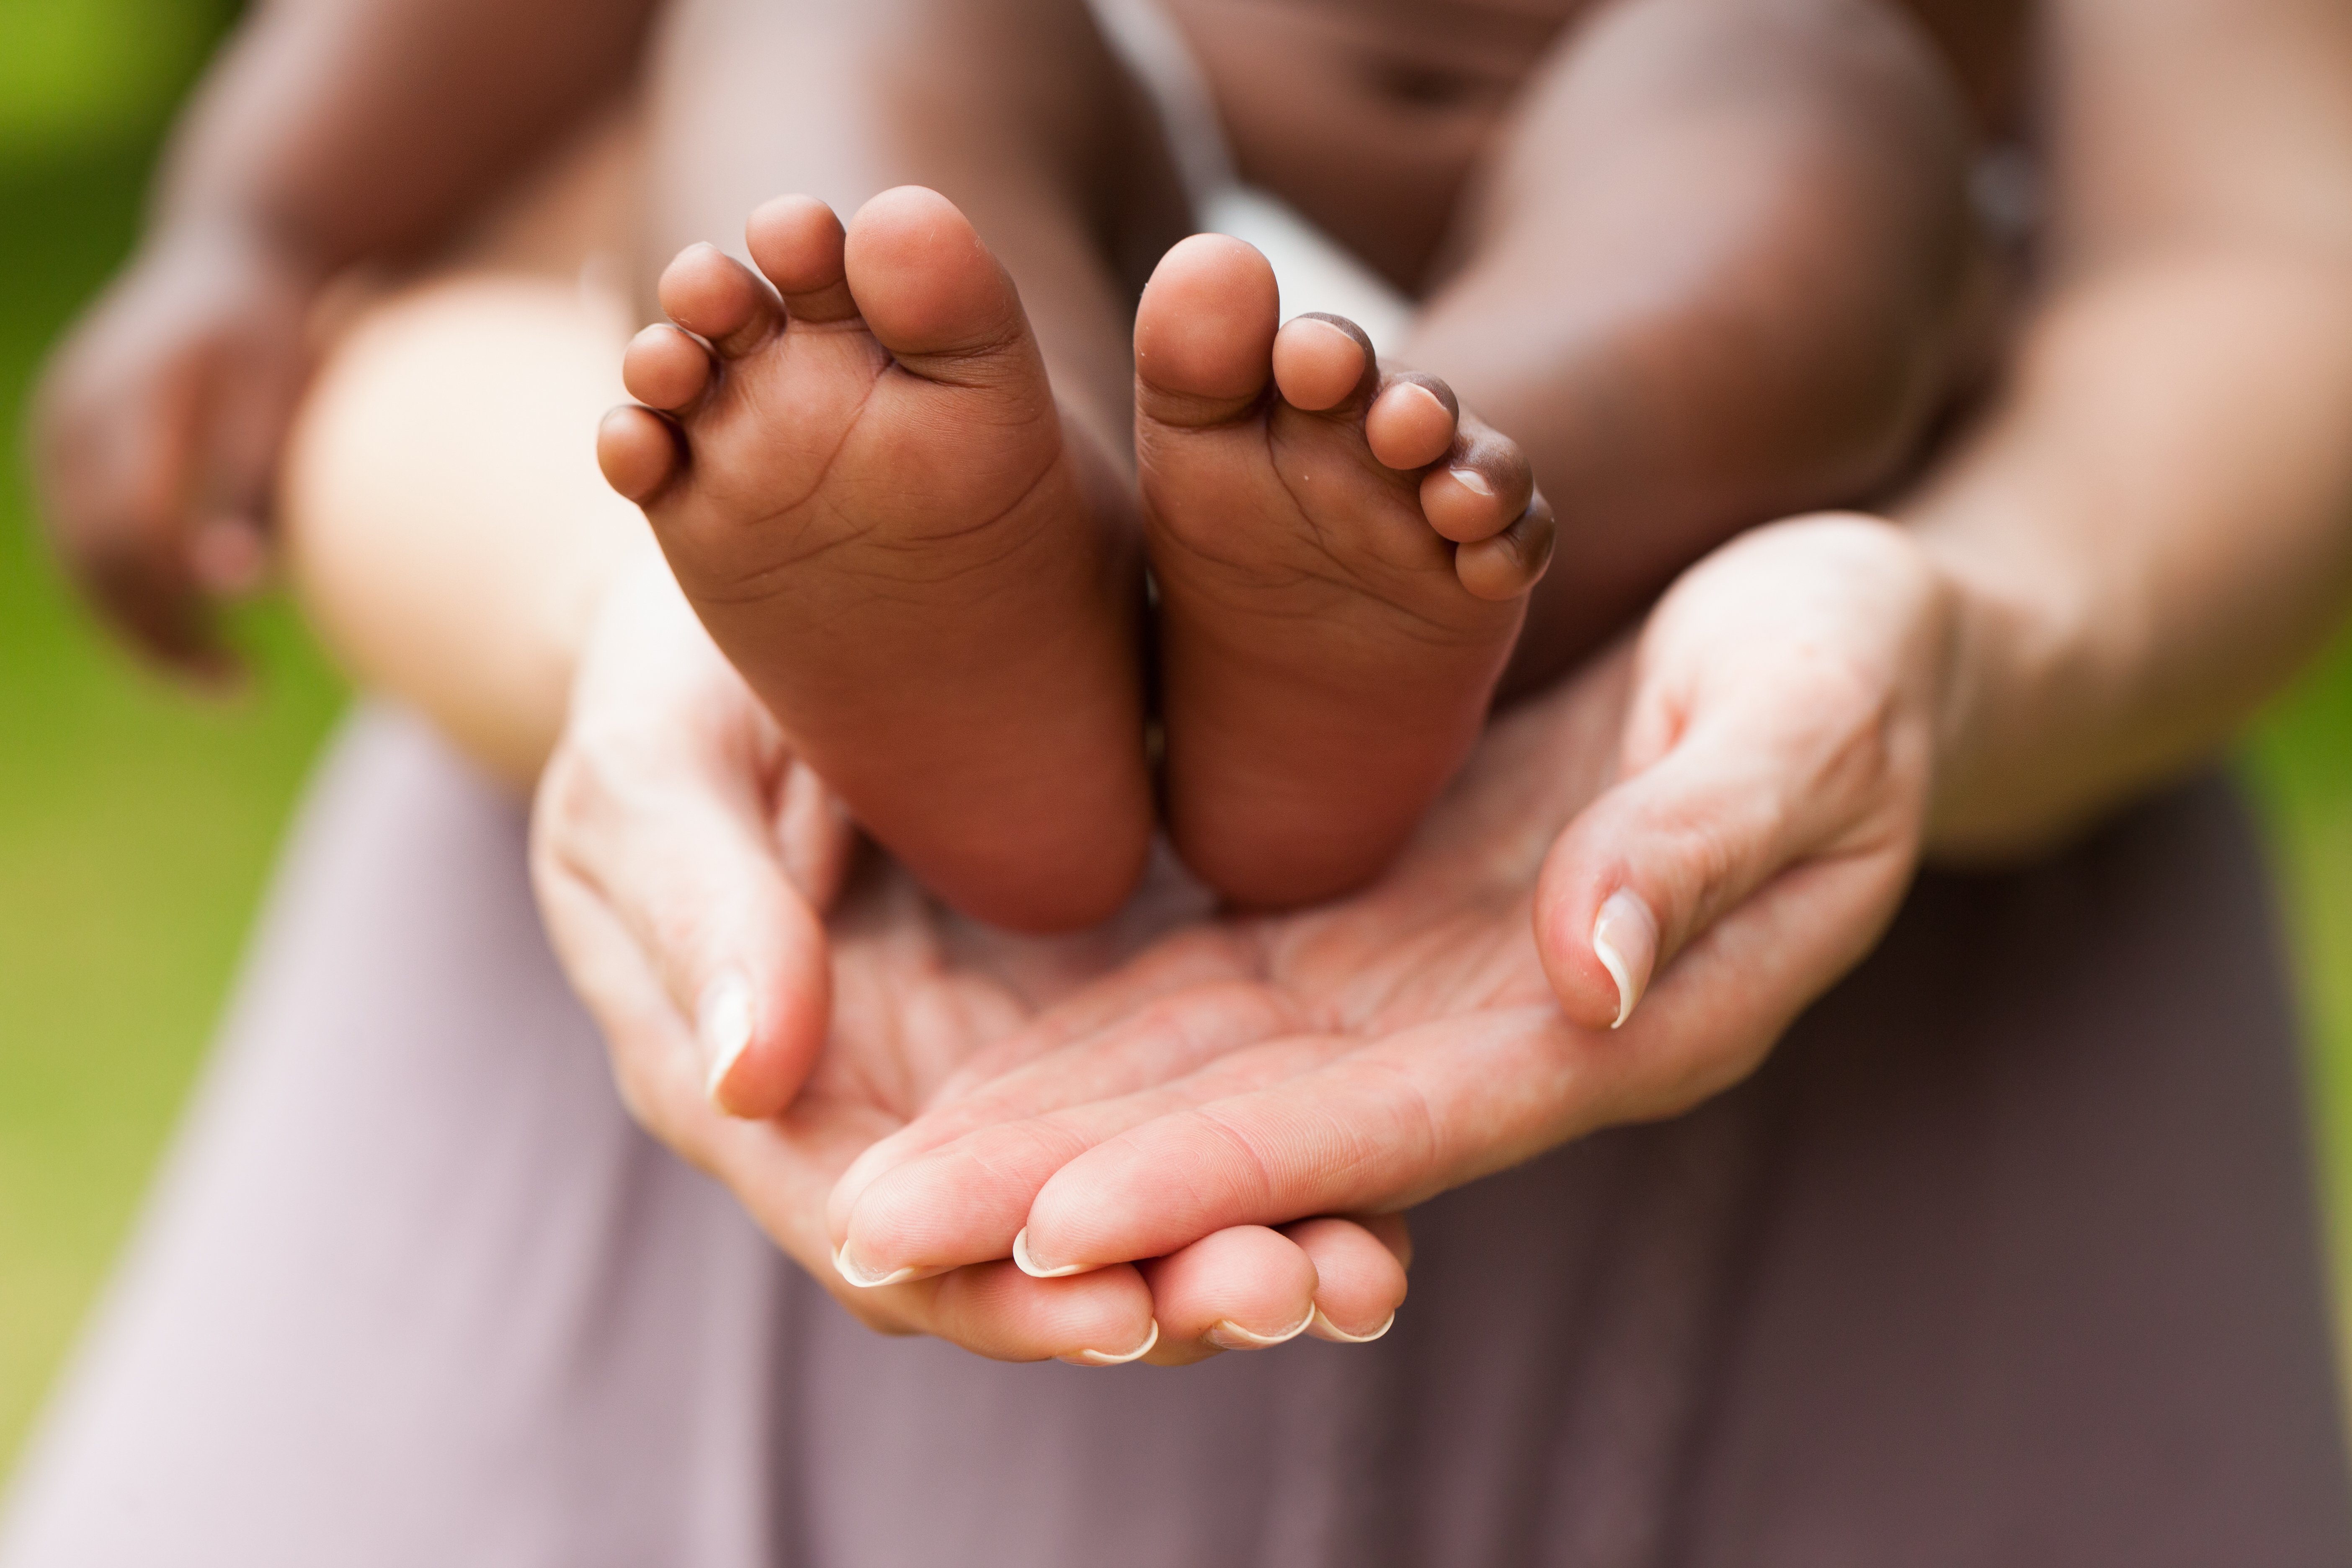 A mother holds her baby's feet. | Source: Getty Images